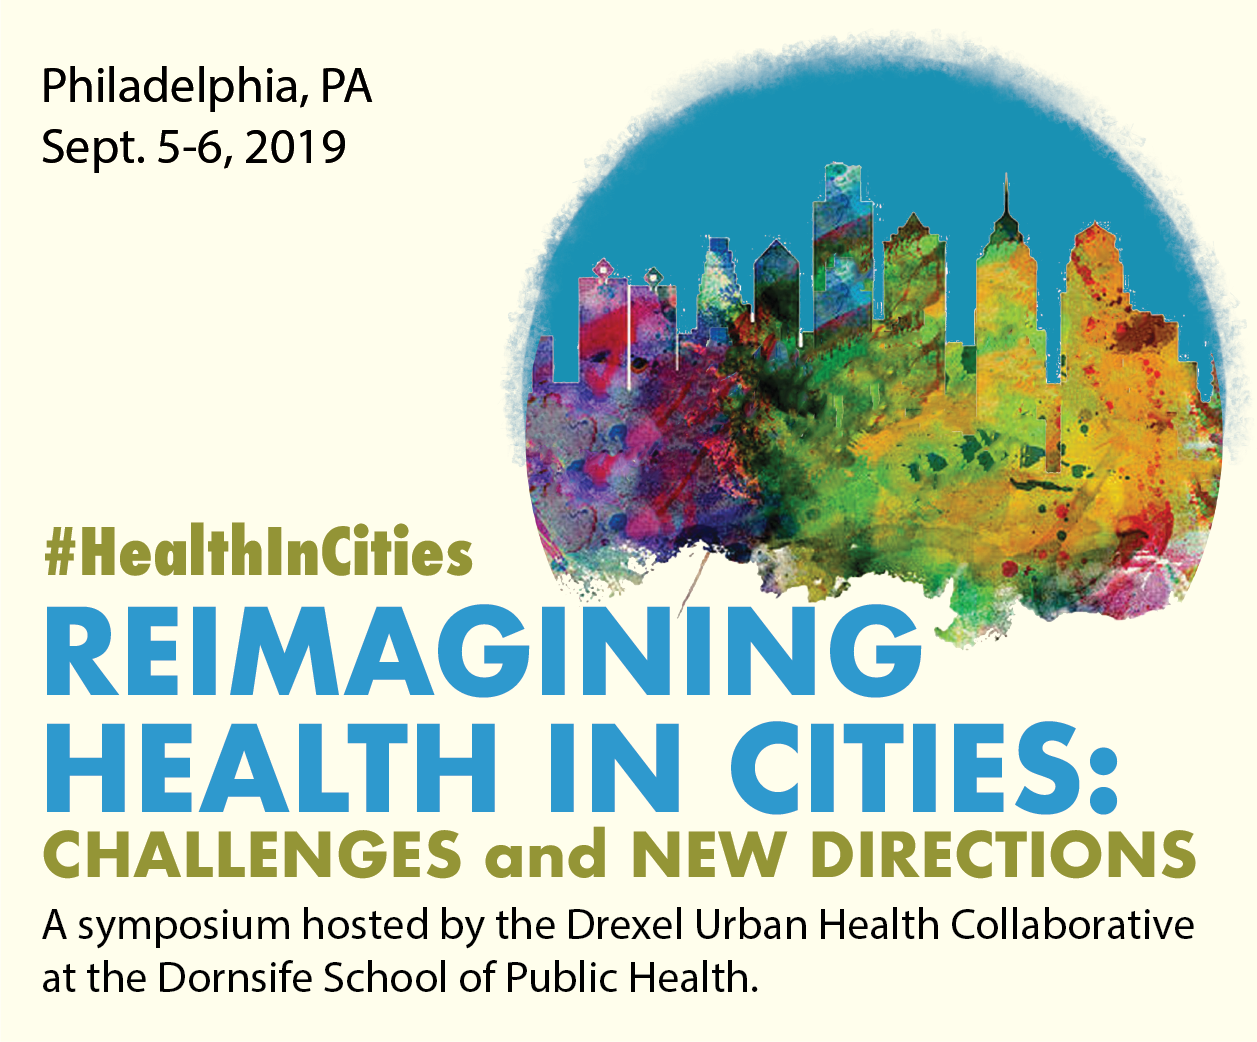 Condensed flyer that contains title, "Reimagining Health in Cities. Challenges and New Directions"